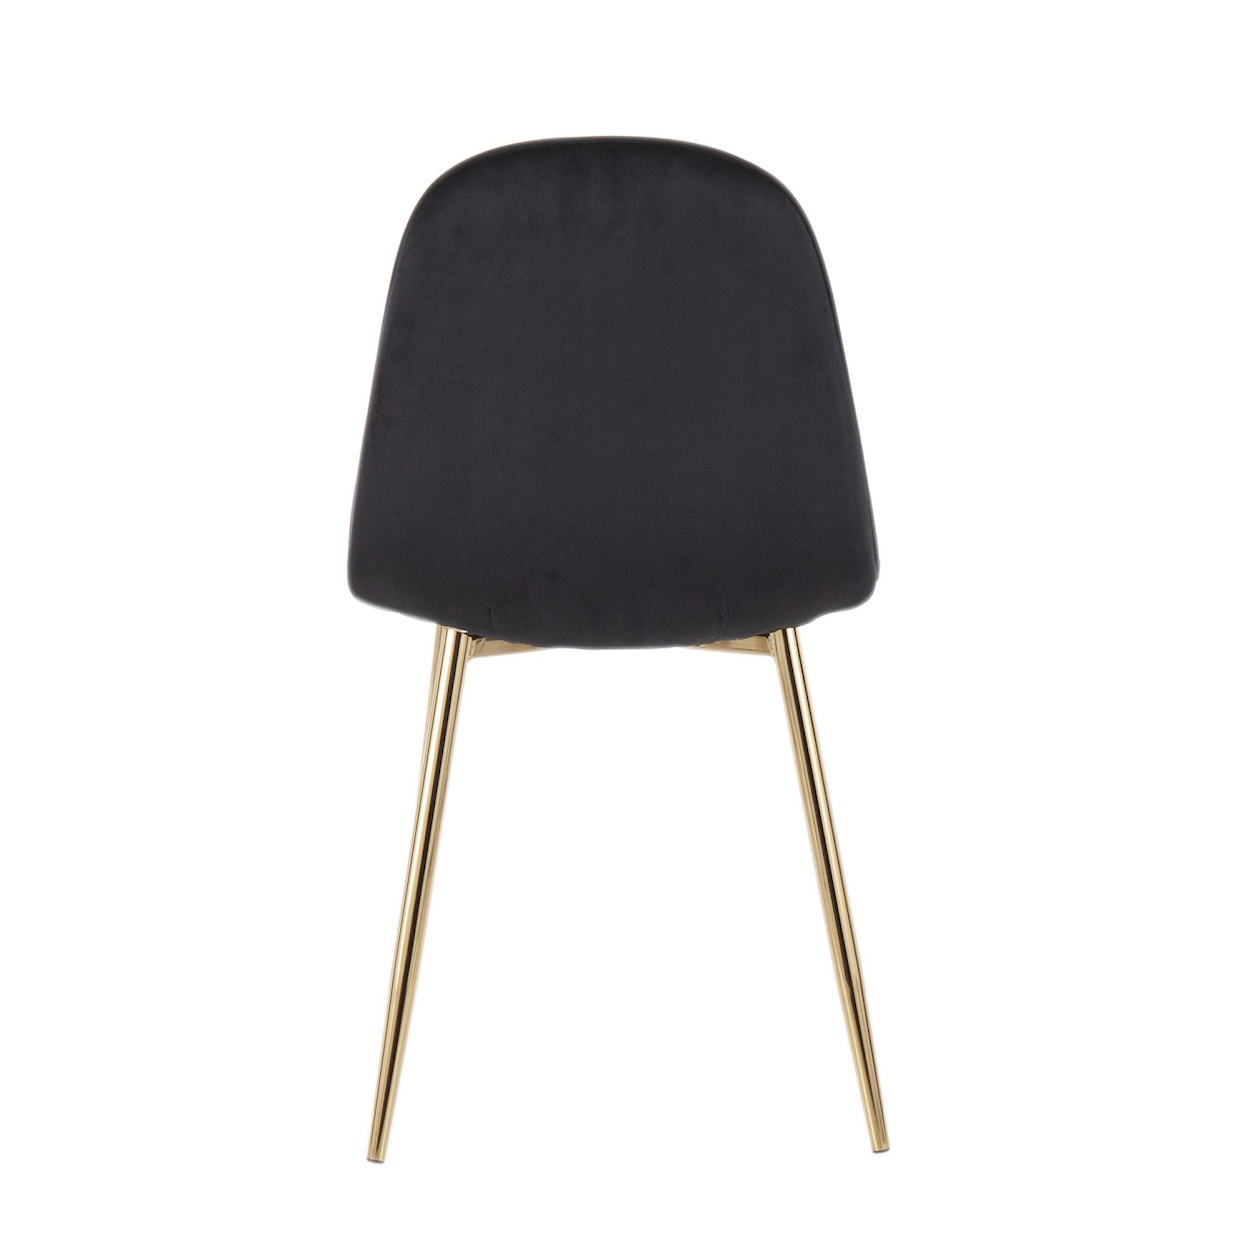 LumiSource Pebble Set of 2 Side Chairs